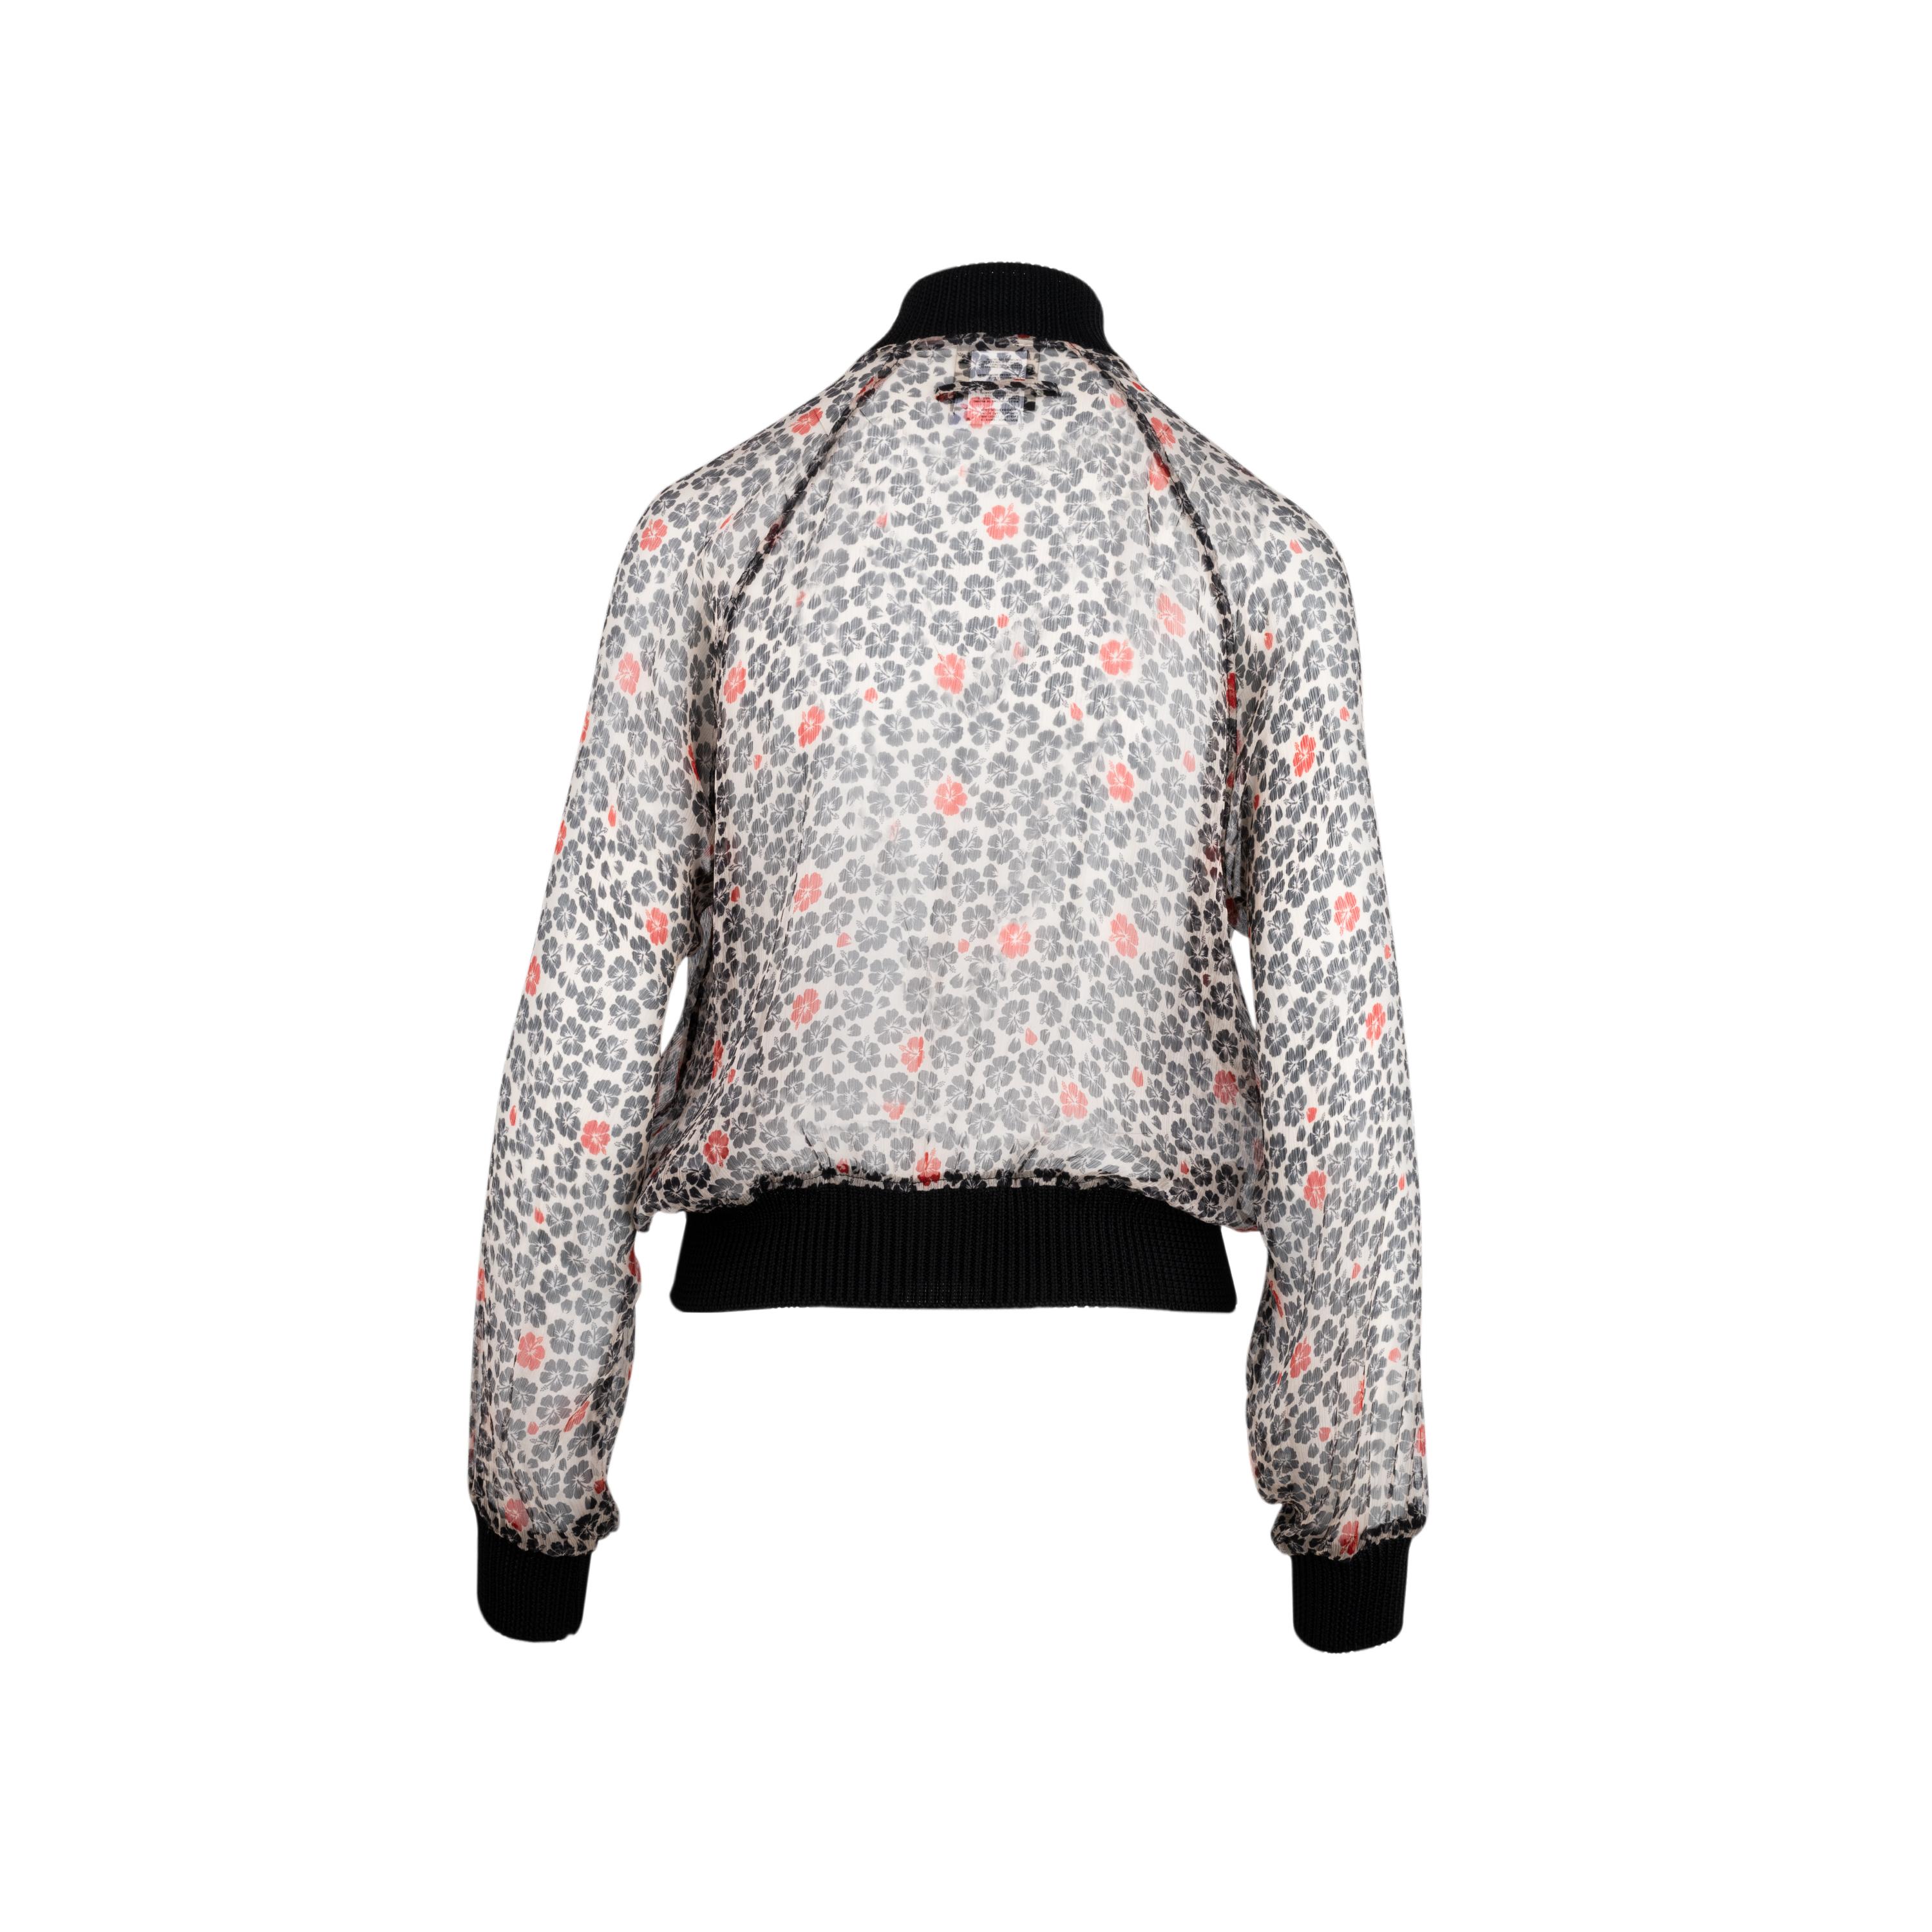 Jean Paul Gaultier Maille Femme line silk bomber jacket. Semi-sheer design with multicolour floral print and zip fastening. 